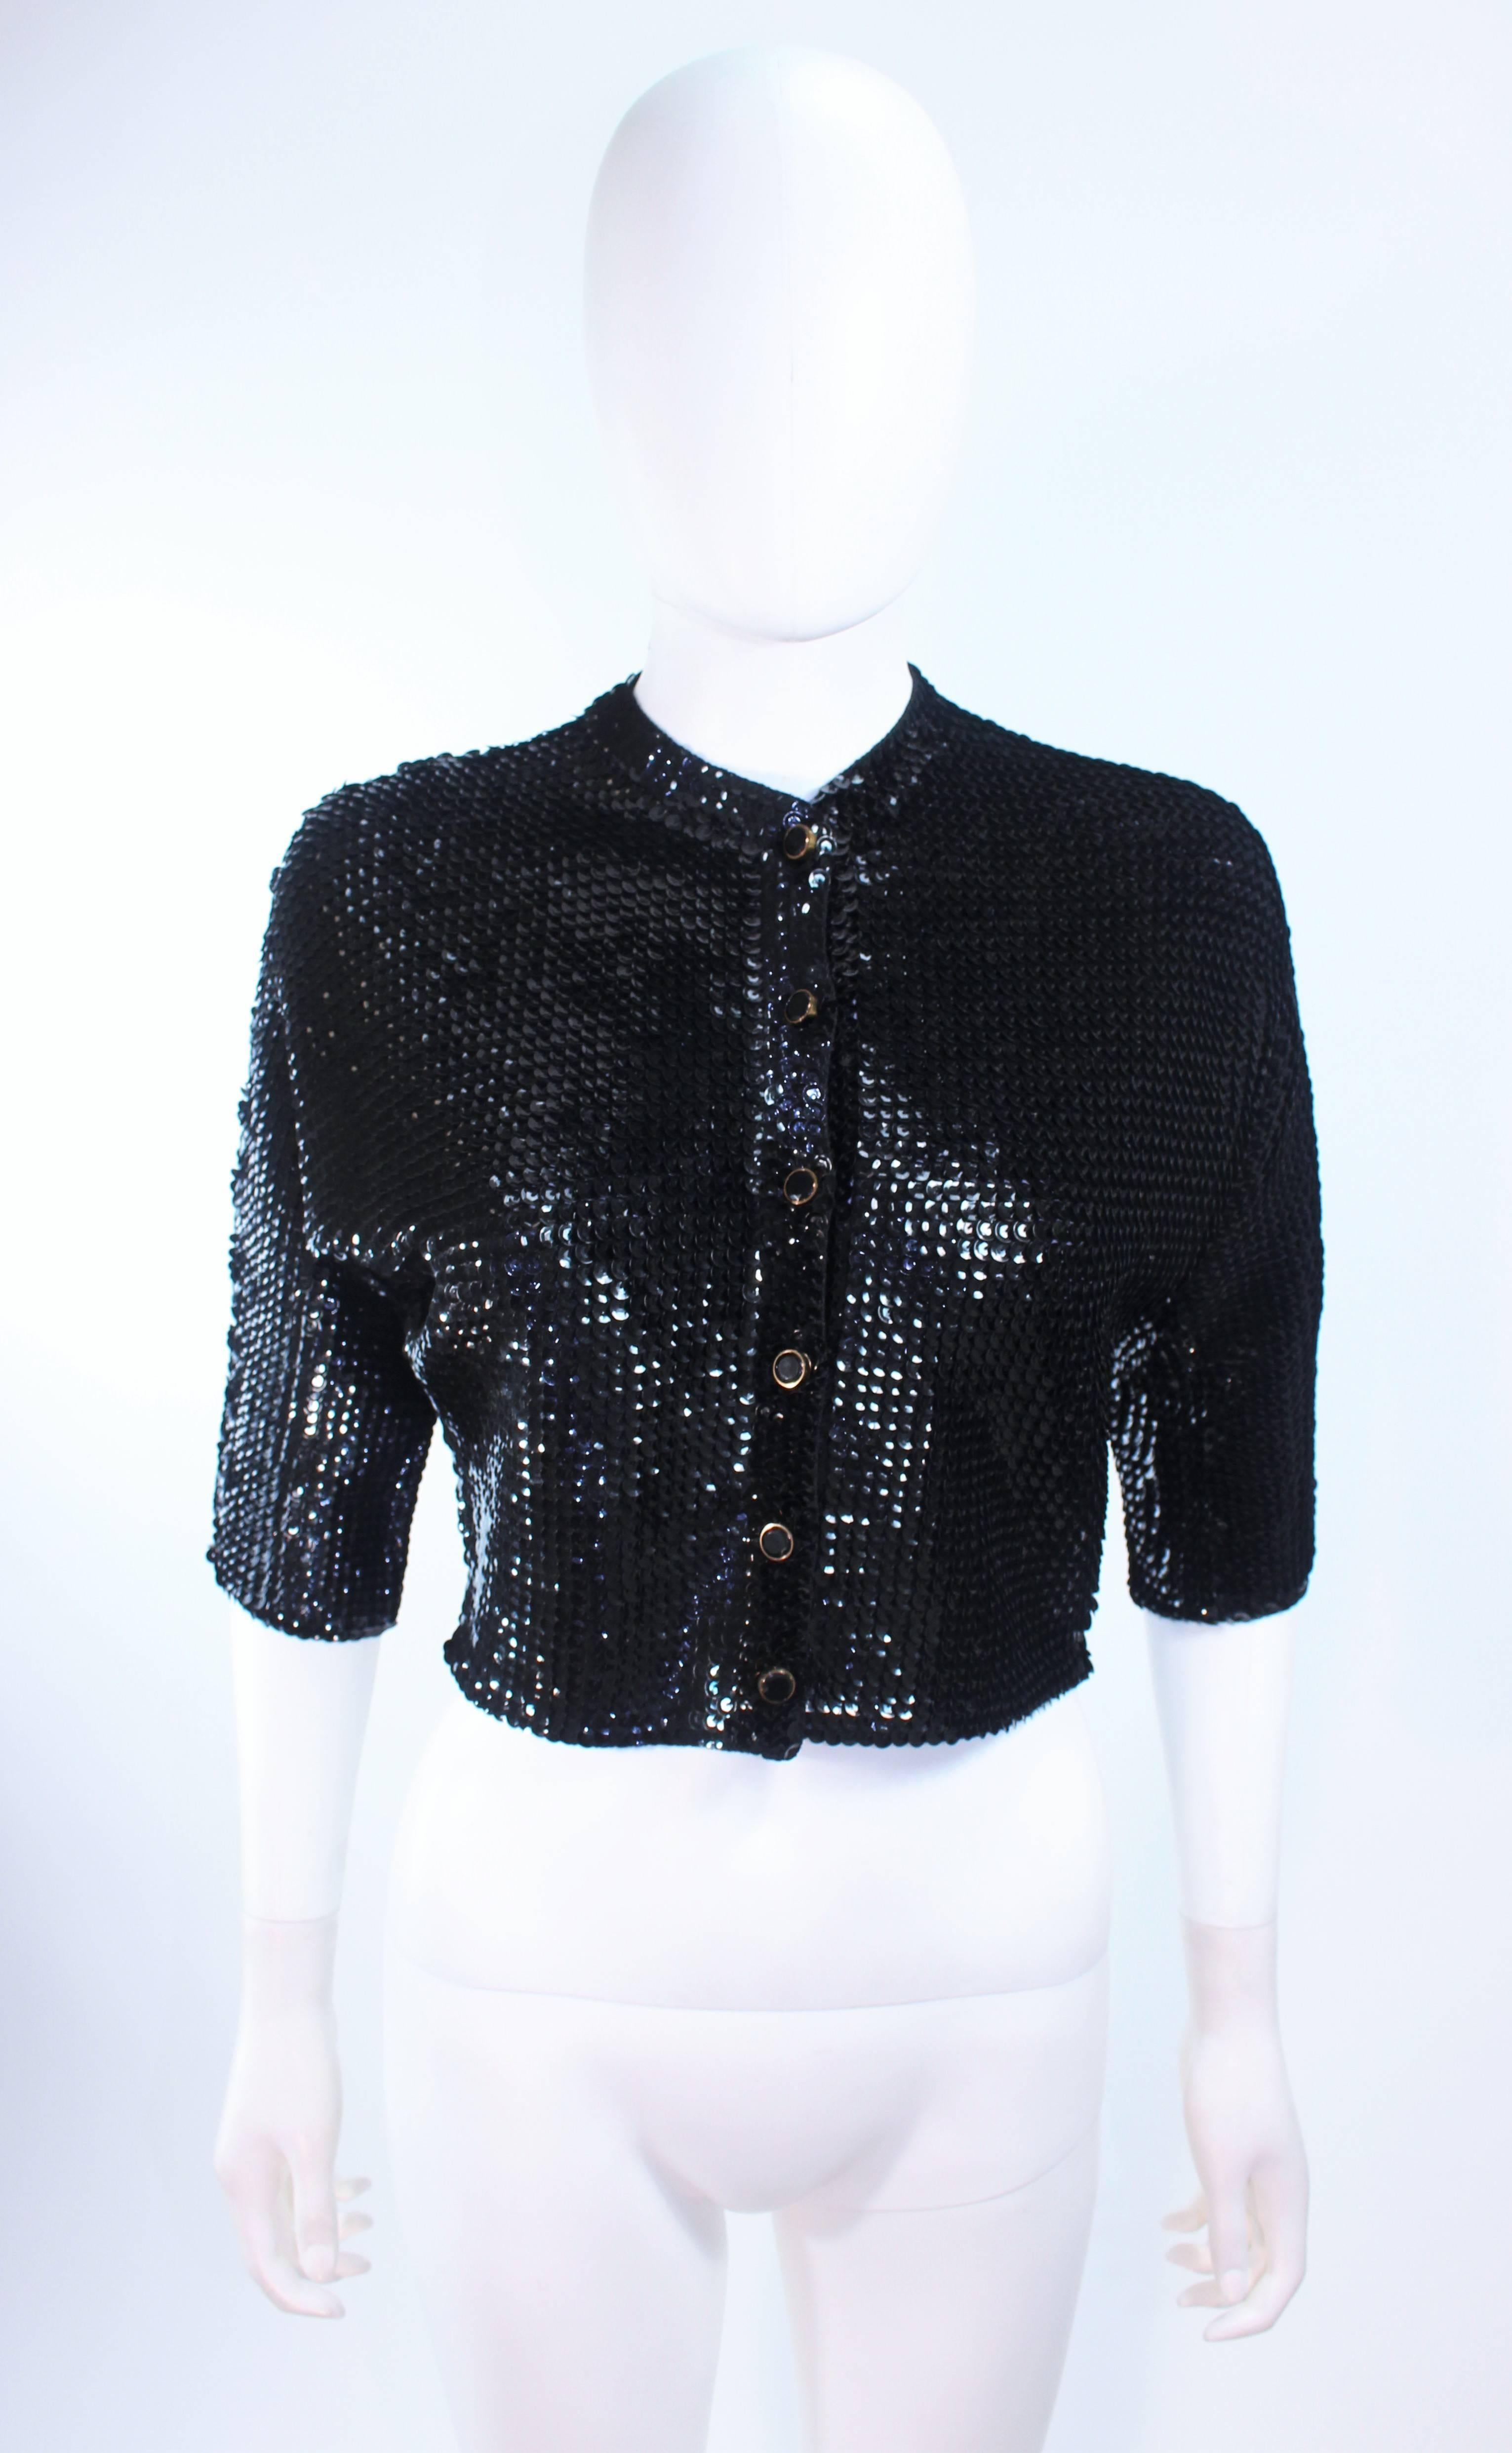 This vintage cardigan is composed of a black sequin wool. There are center front black and gold faceted buttons. In excellent vintage condition.

**Please cross-reference measurements for personal accuracy. Size in description box is an